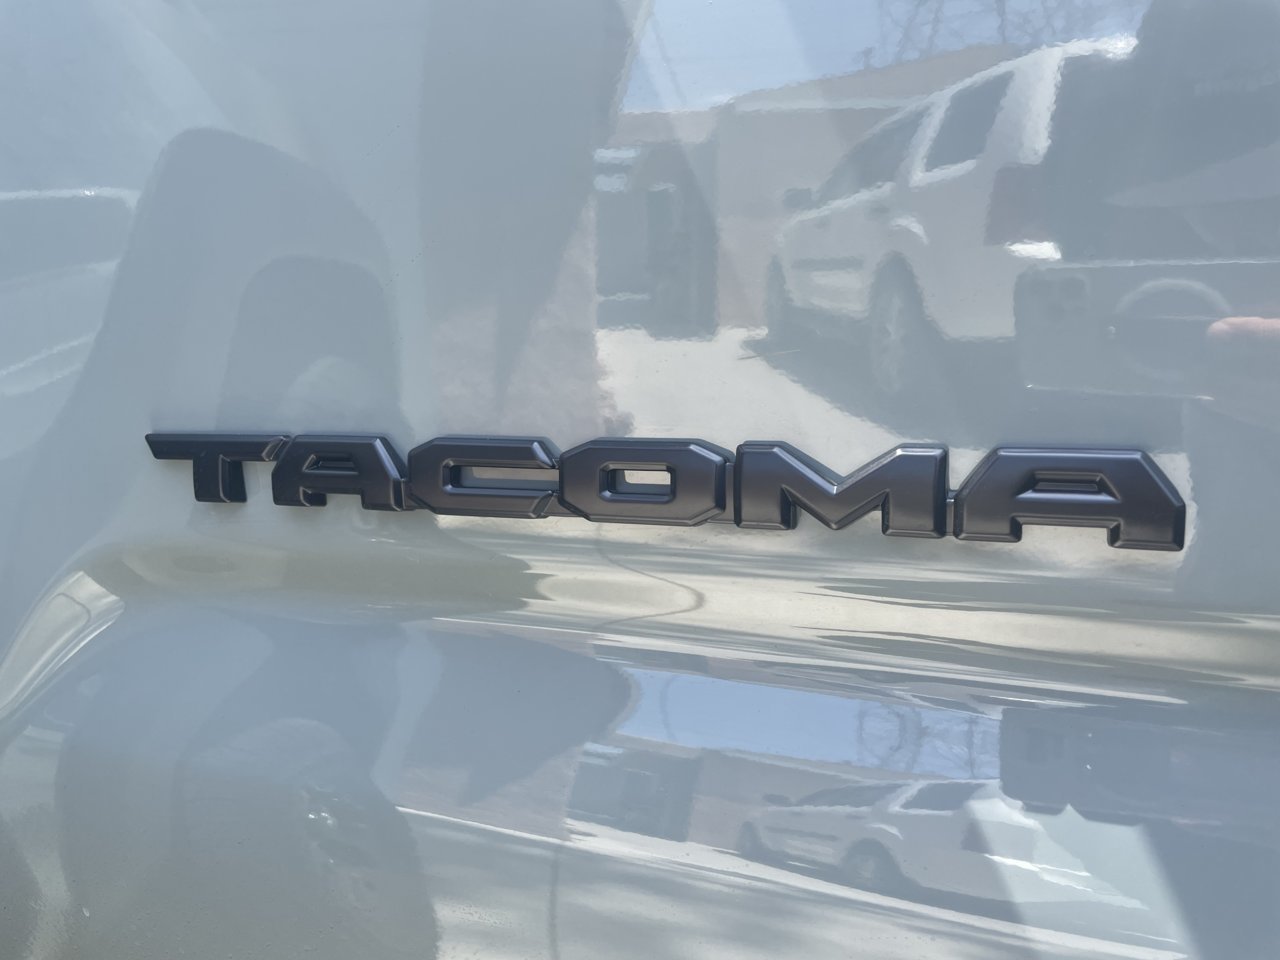 OEM Black Tacoma decal; not Overlay.